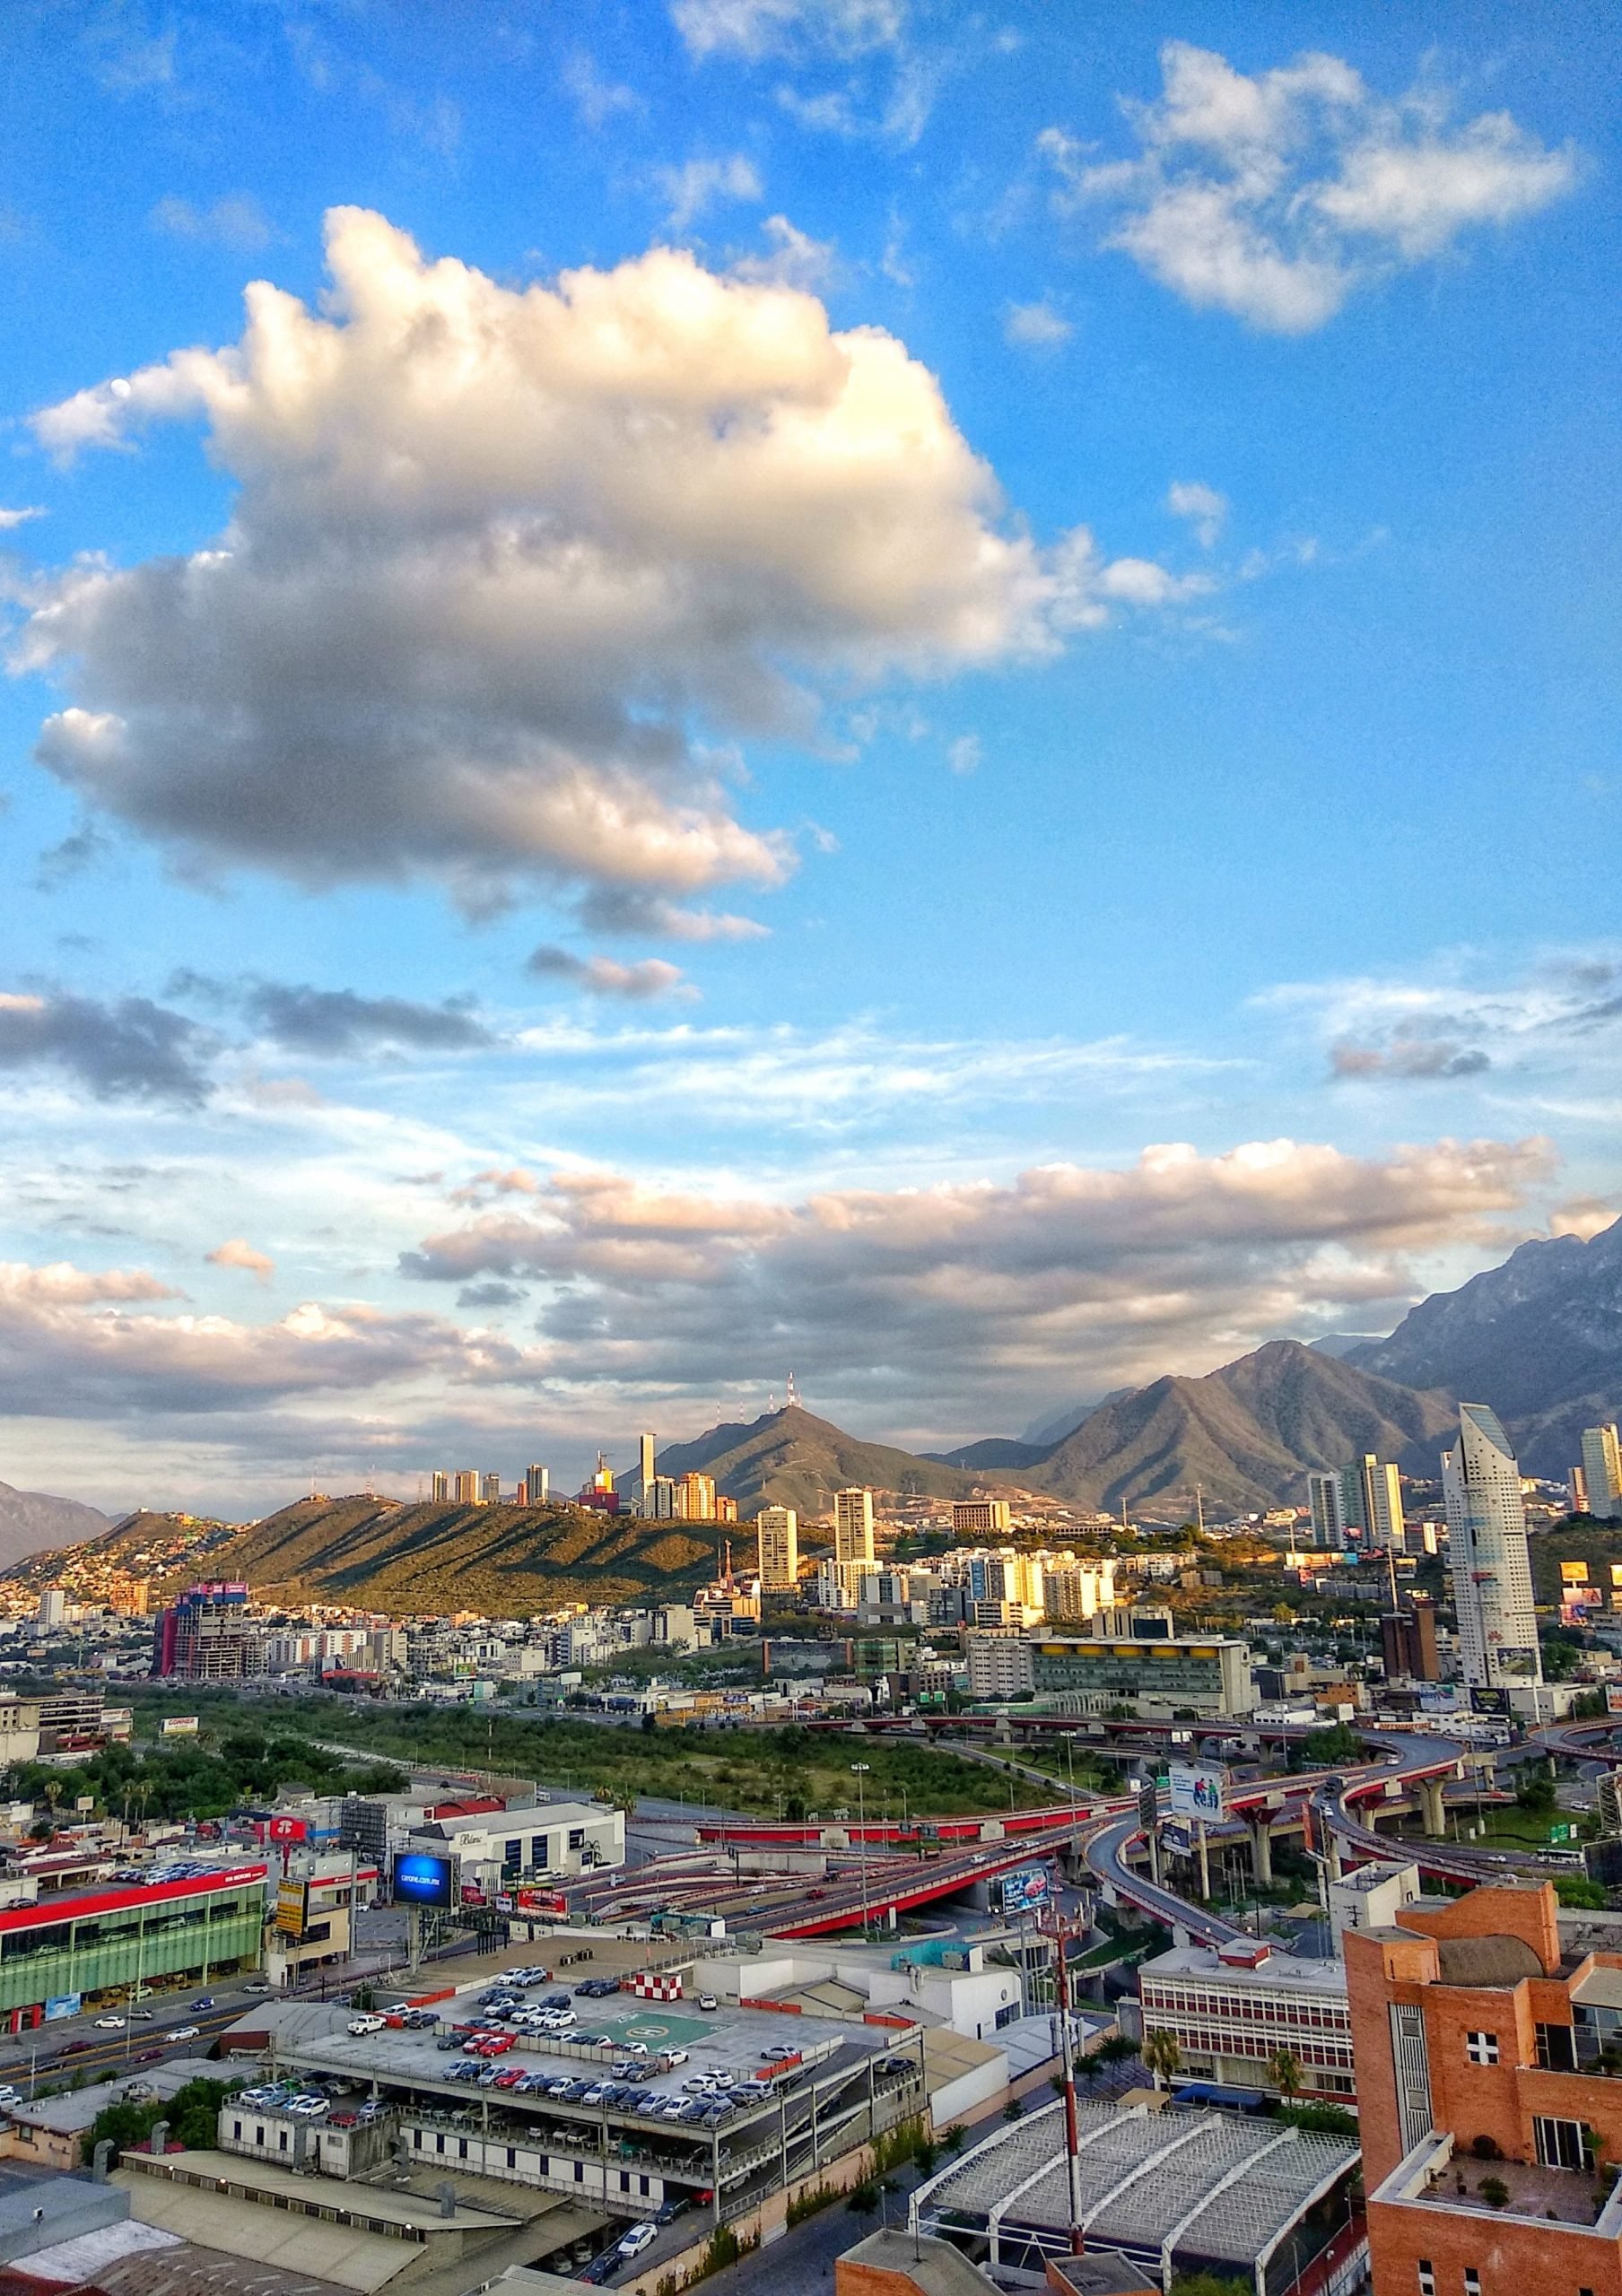 How To Get From Monterrey Airport To City Center - All Possible Ways, cheapest way from Monterrey airport to city center, Monterrey airport to city center